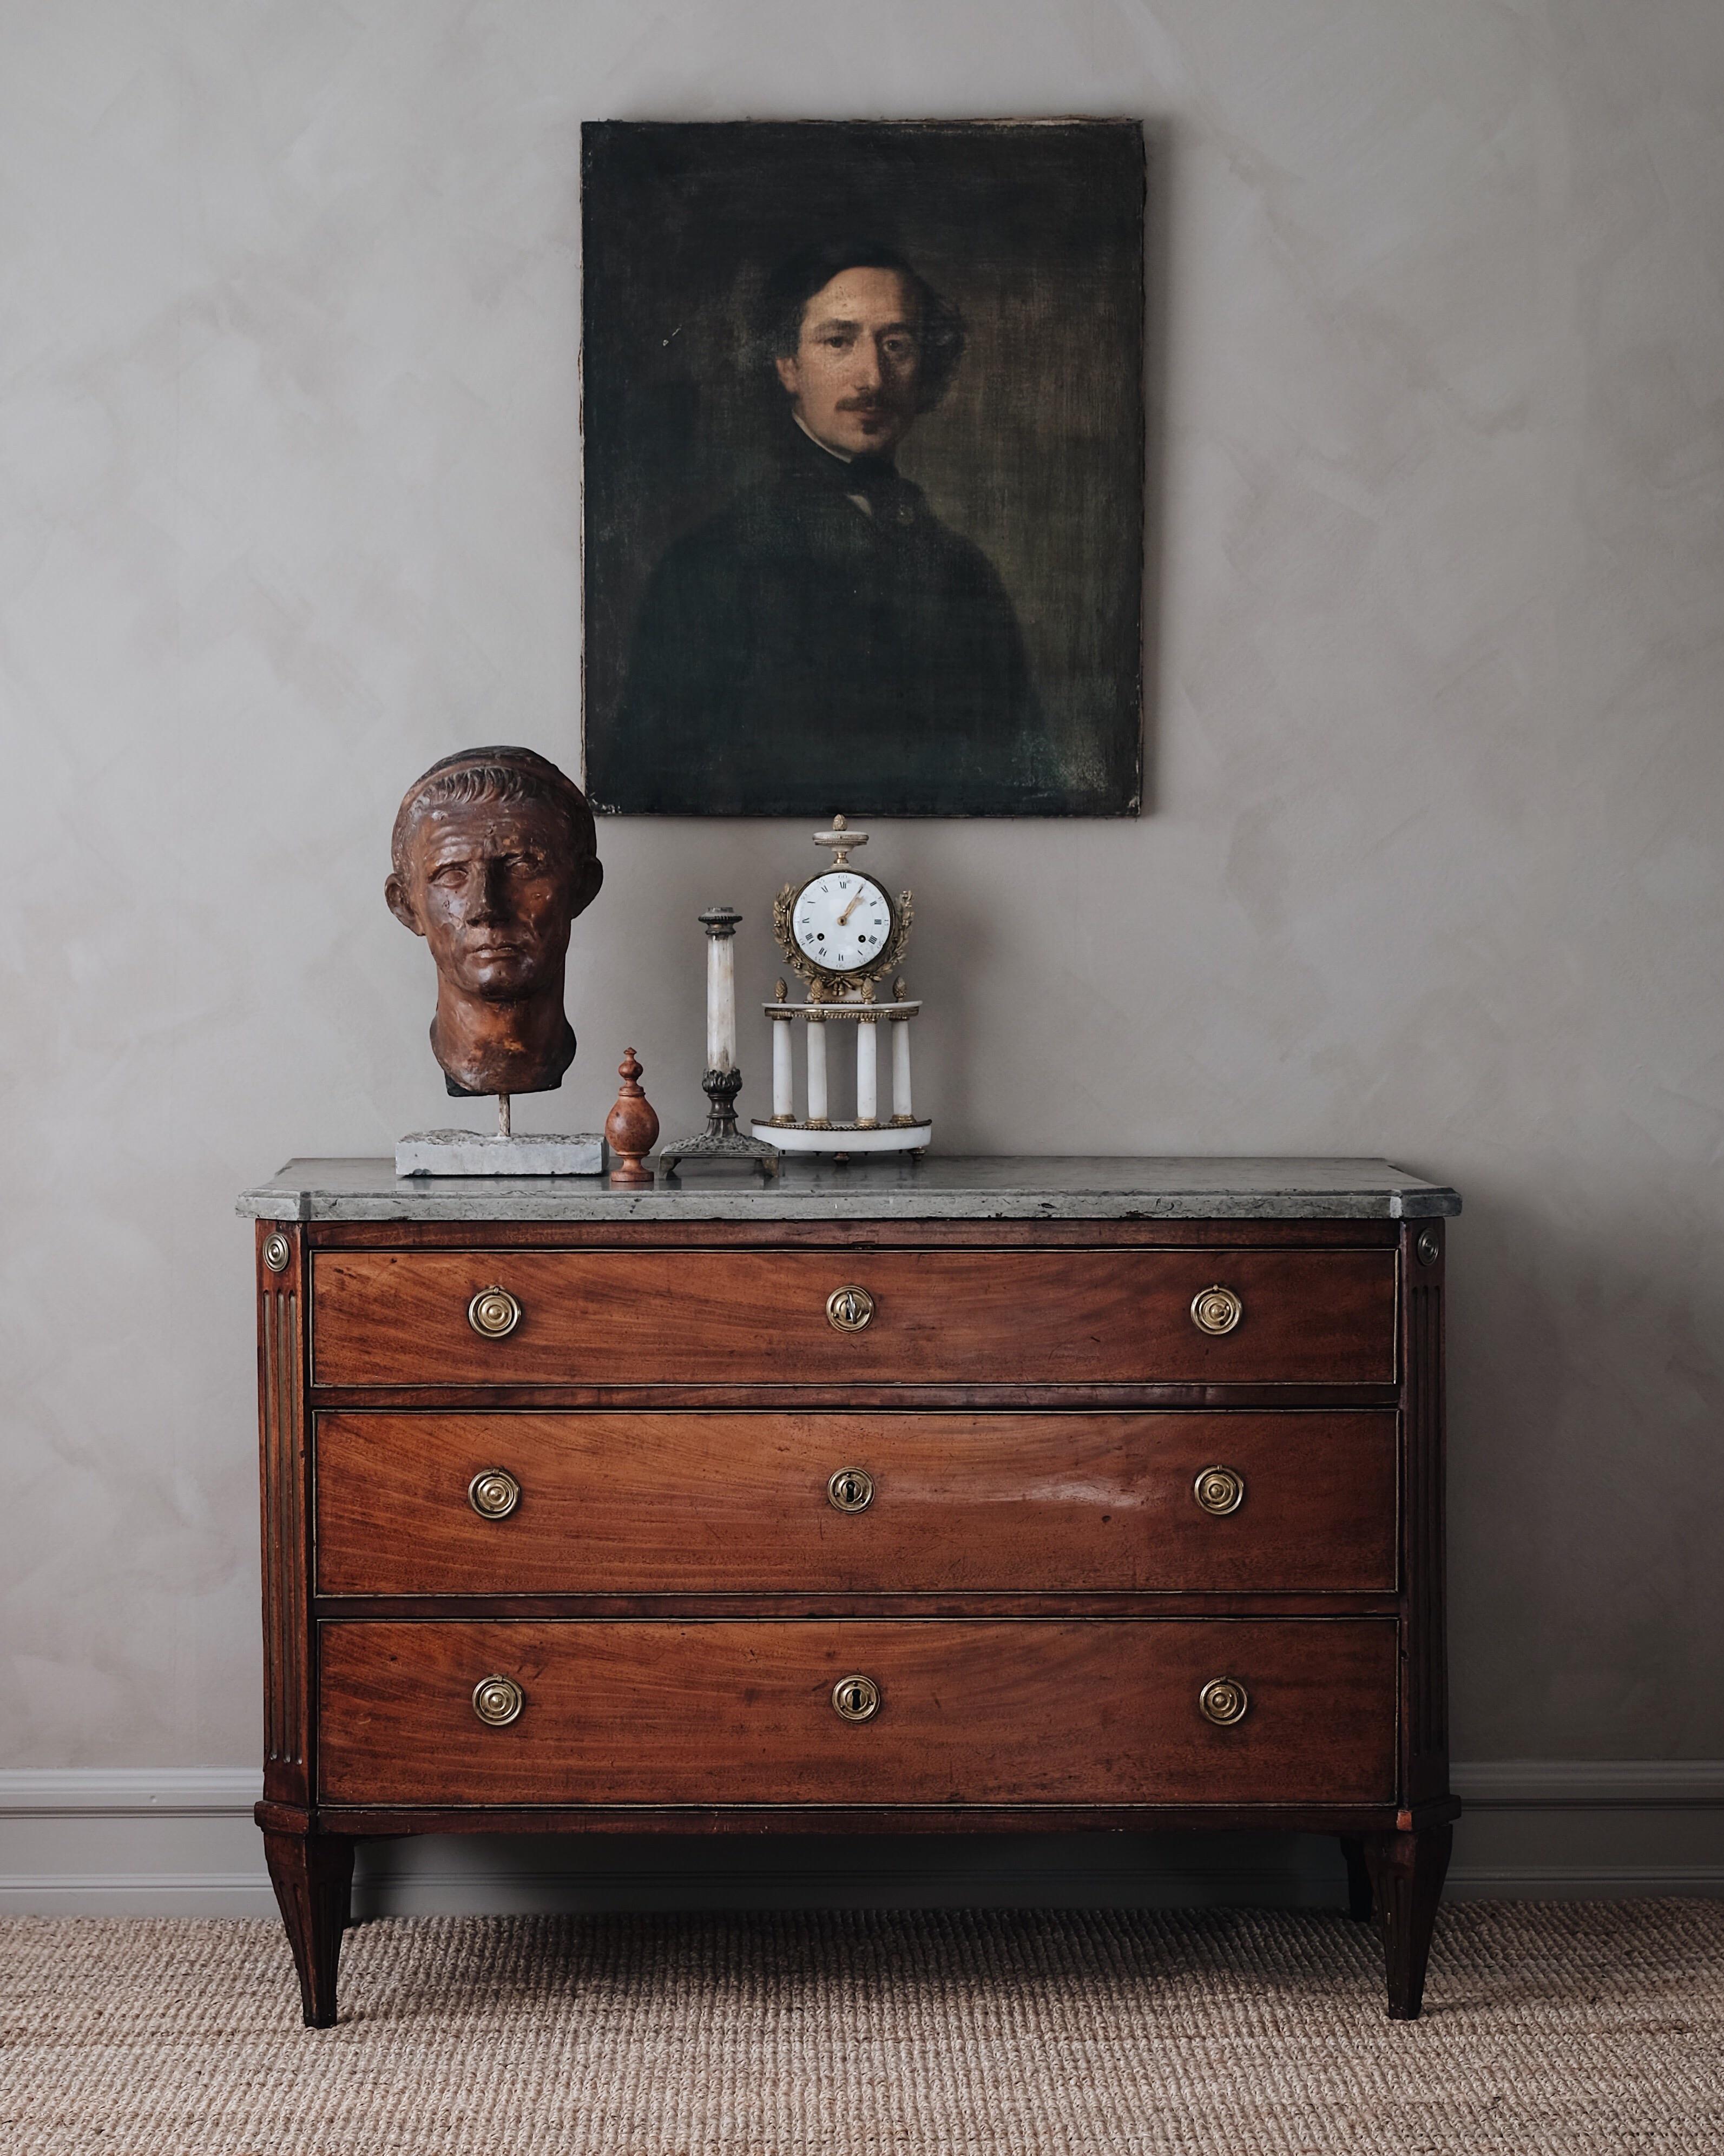 Exceptional Swedish 18th century Gustavian chest of drawers/commode veneered in mahogany with a very nice and subtle patina and good proportions. Original chalkstone top plate from the Swedish island of O¨land, circa 1790 Stockholm, Sweden.

 